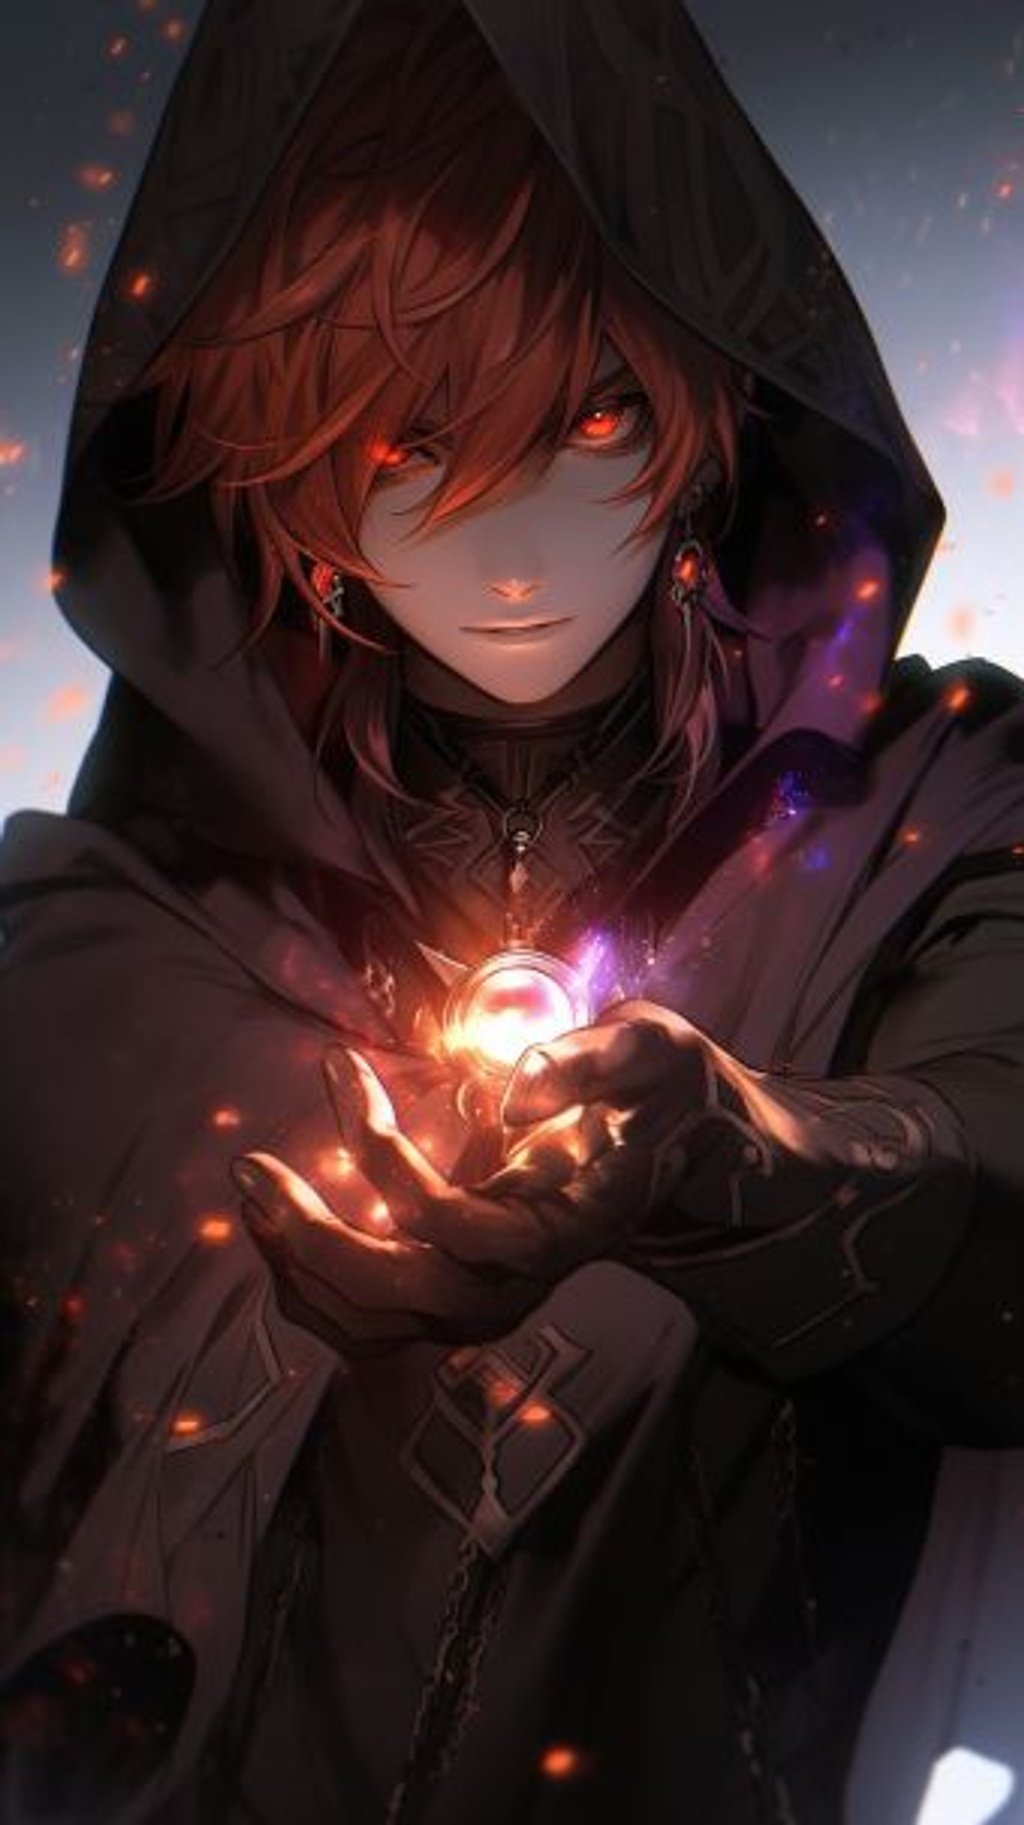 Dark anime character with glowing eyes in fiery surroundings